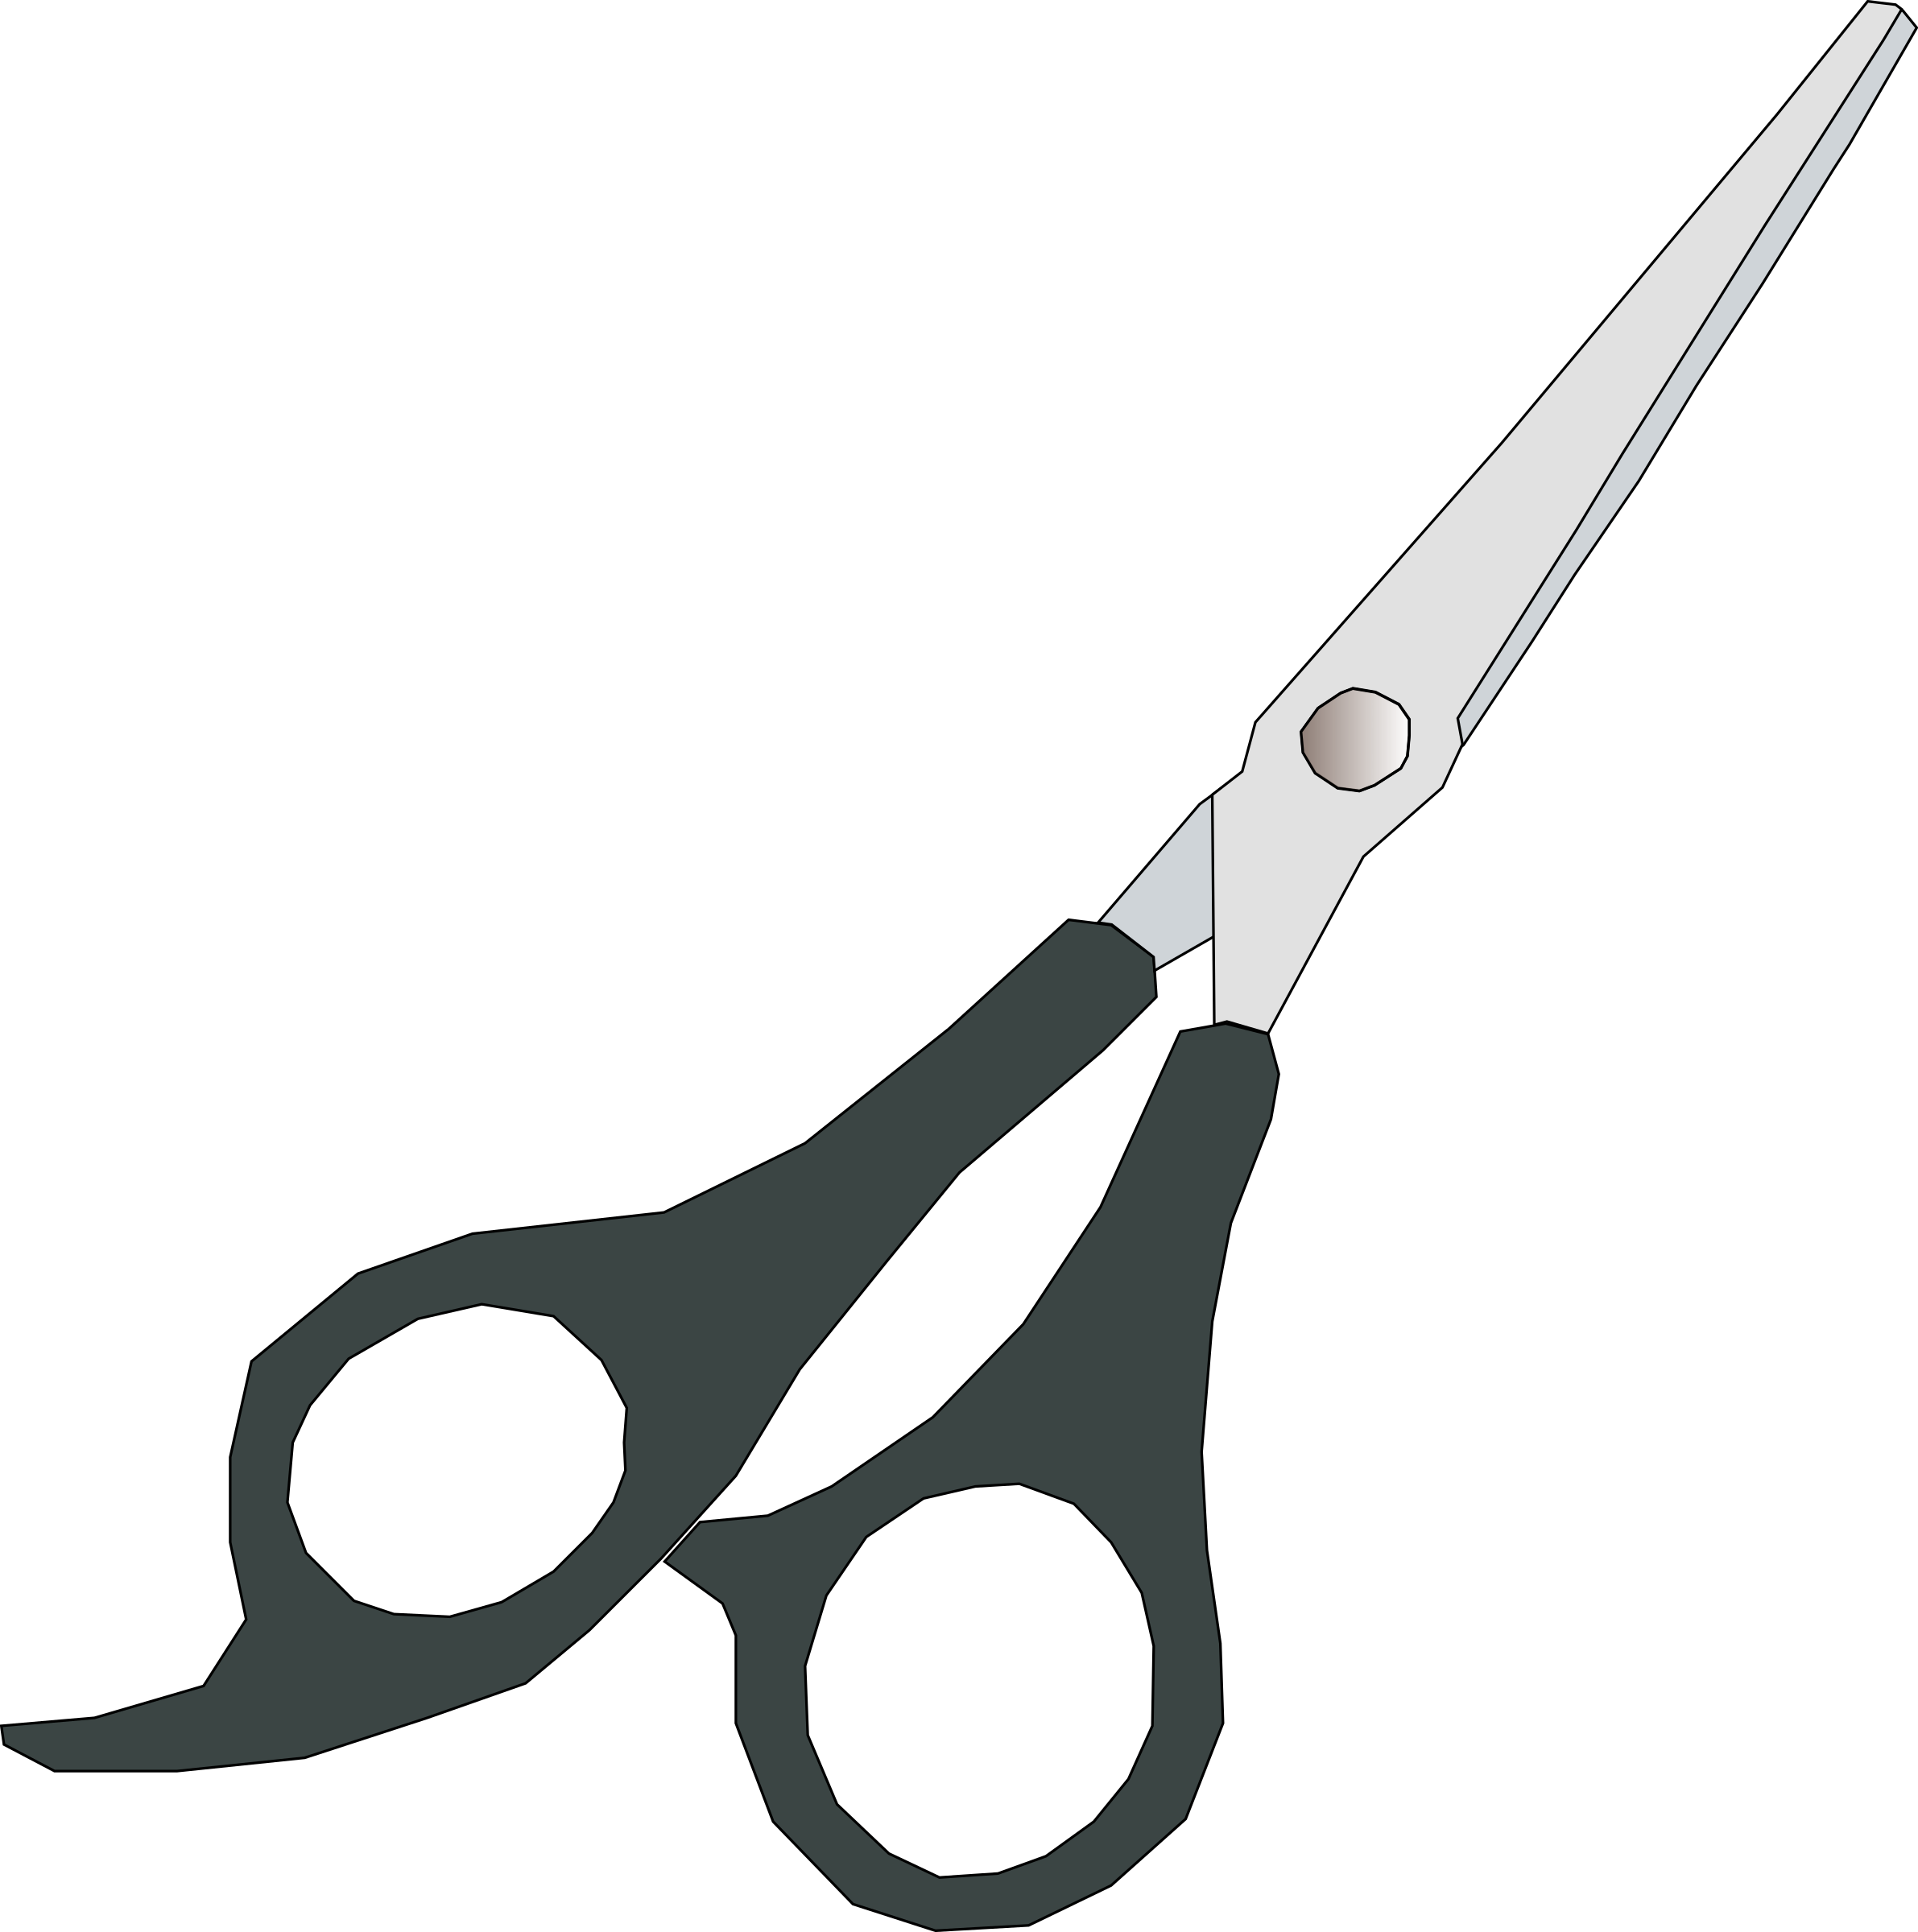 Shears clipart use, Shears use Transparent FREE for download on